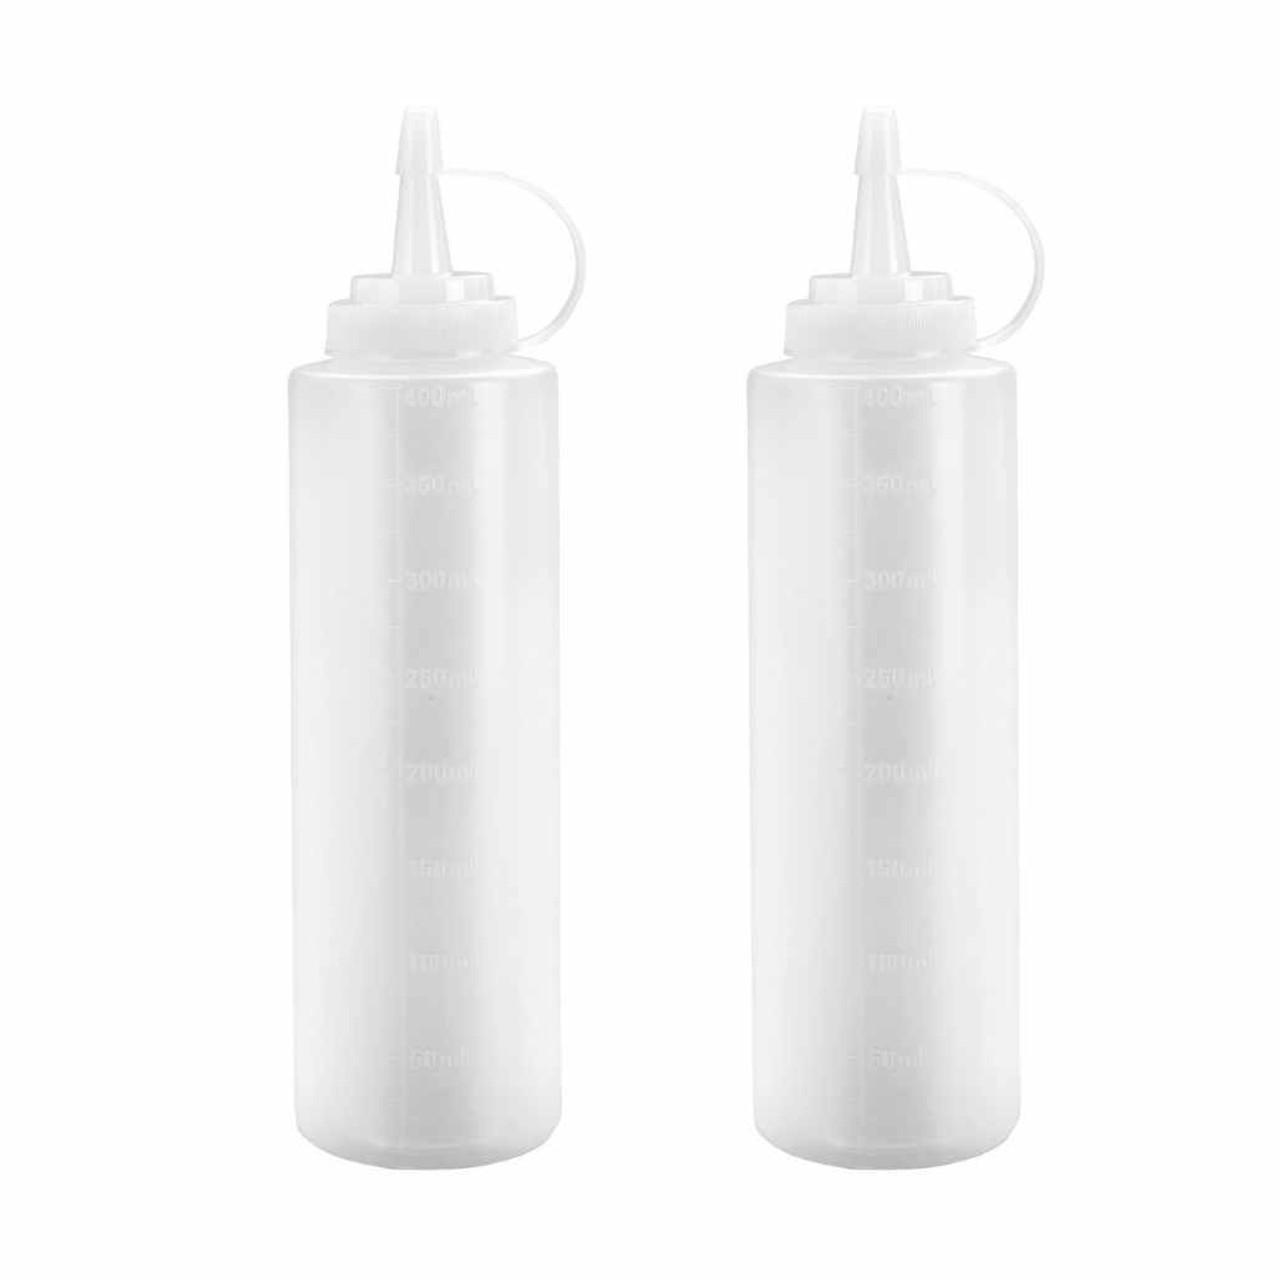 Chef condiment squeeze bottles - 2 pack